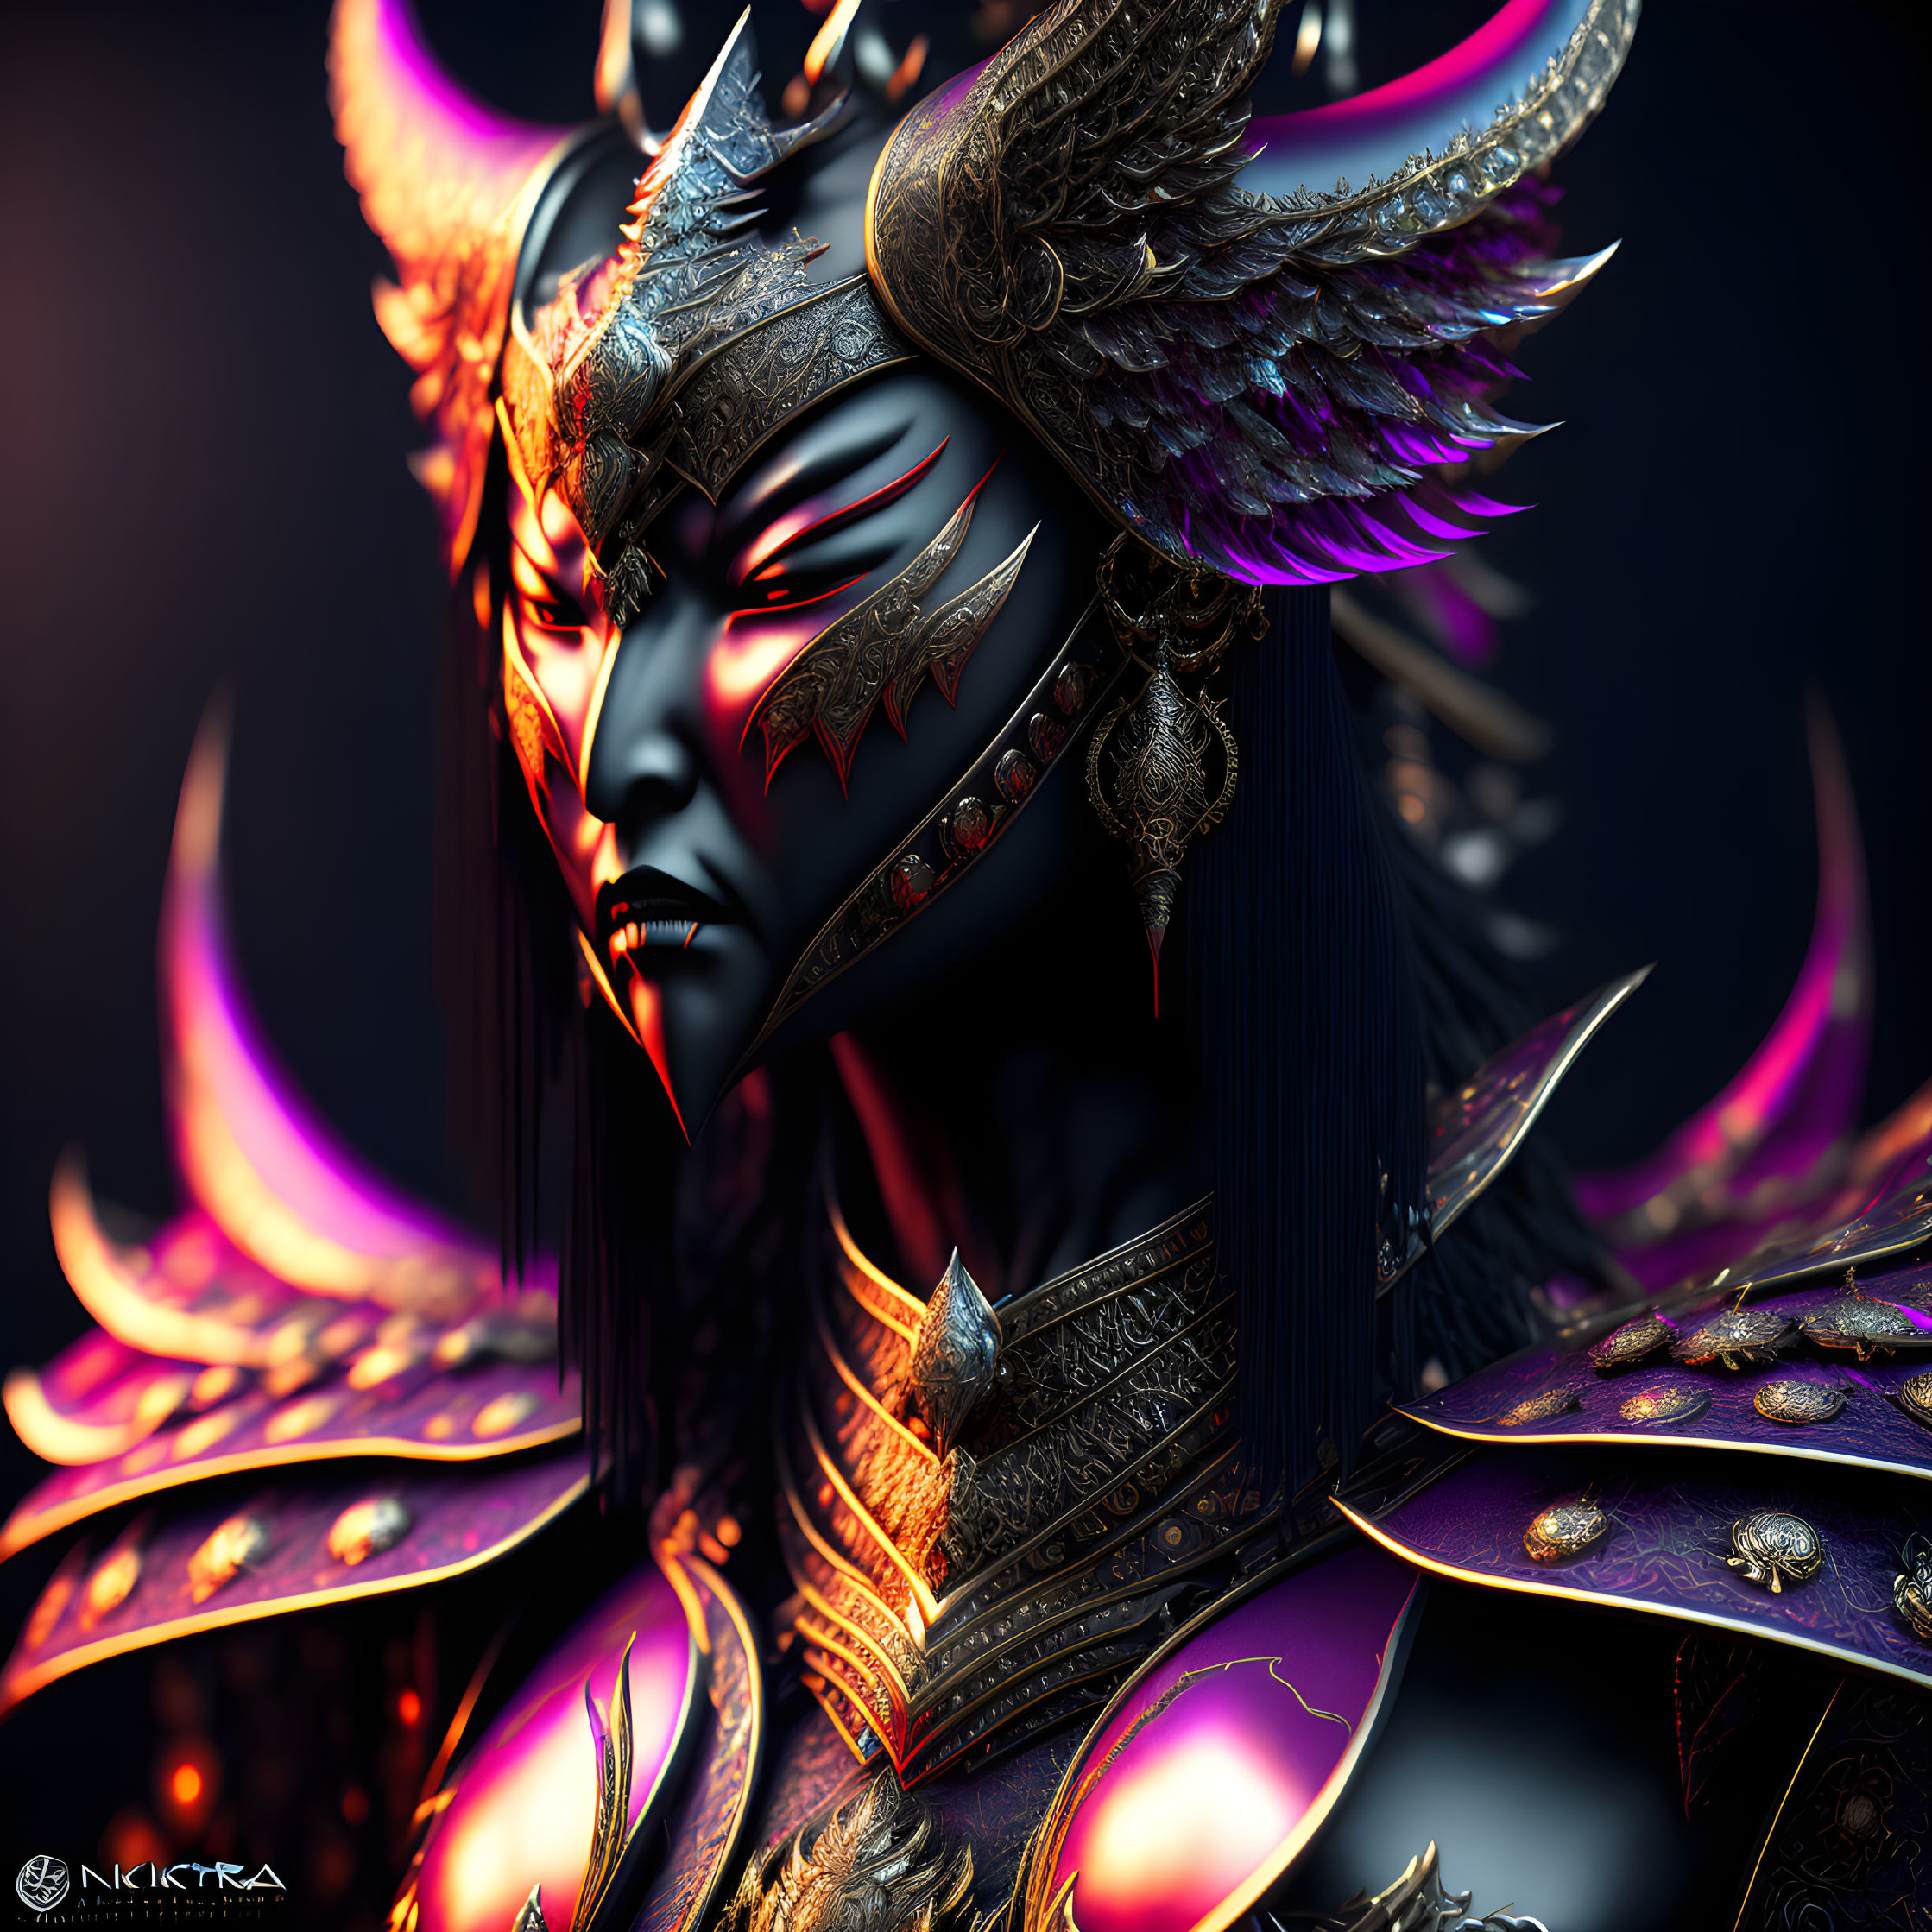 Detailed 3D fantasy warrior illustration with metallic textures, winged helmet, and elaborate armor.